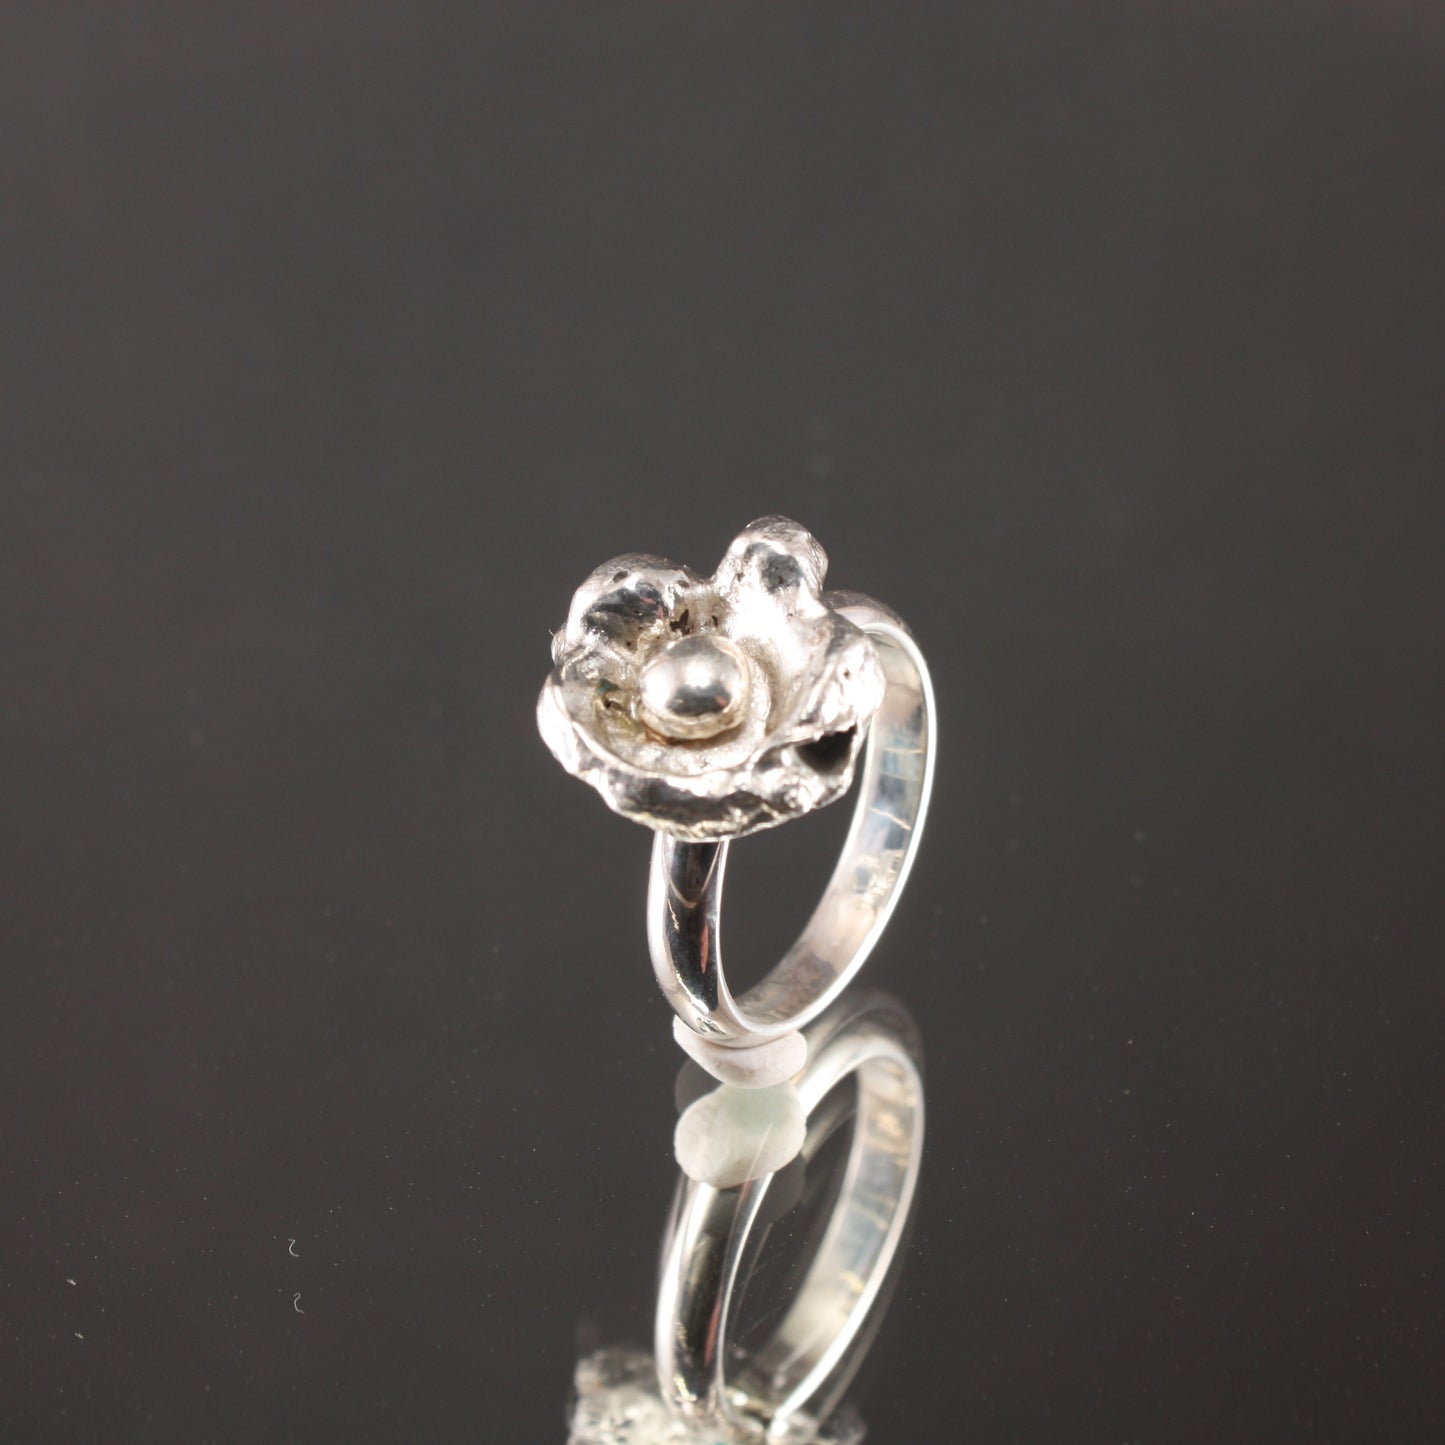 Water Cast Sterling Silver Ring